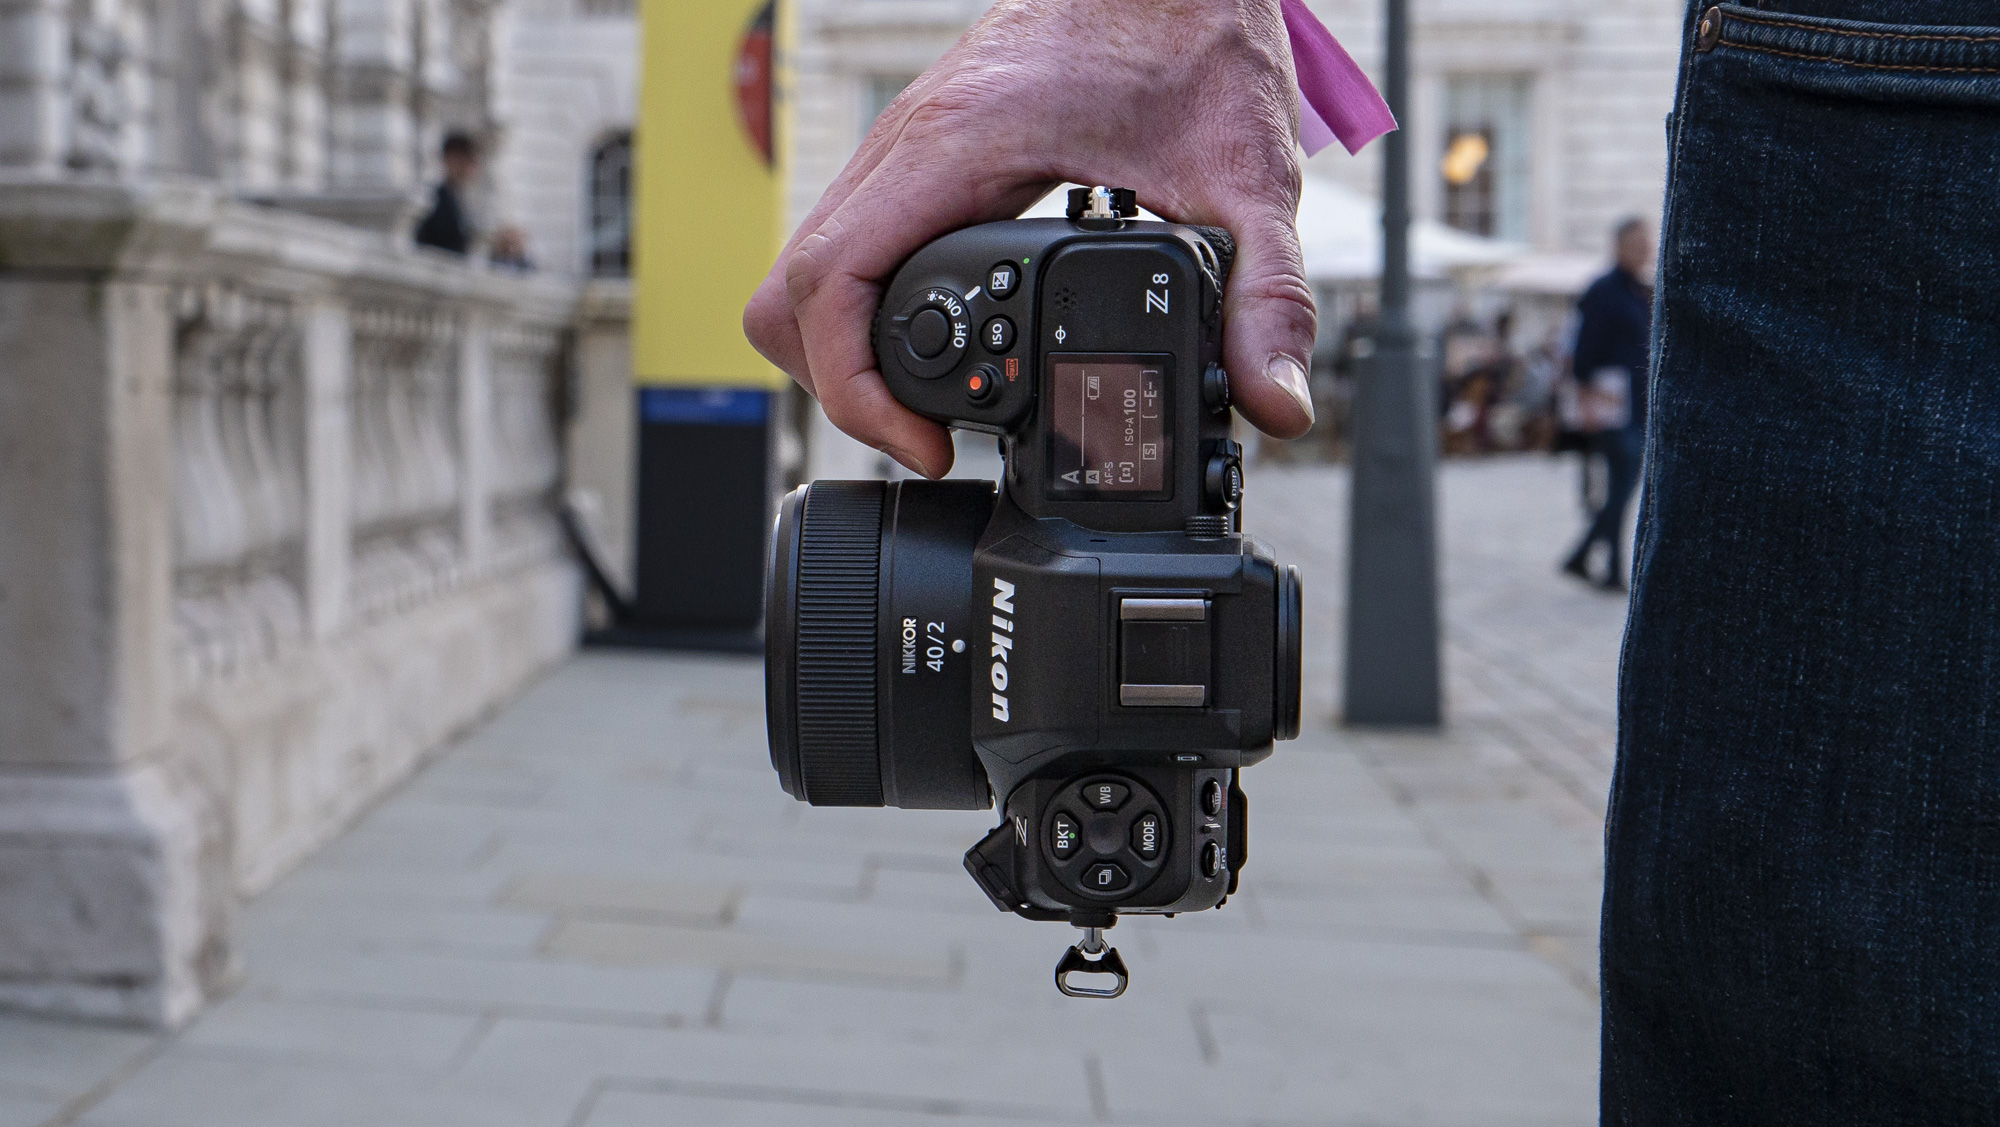 Nikon Z8 camera in the hand with looking at top plate